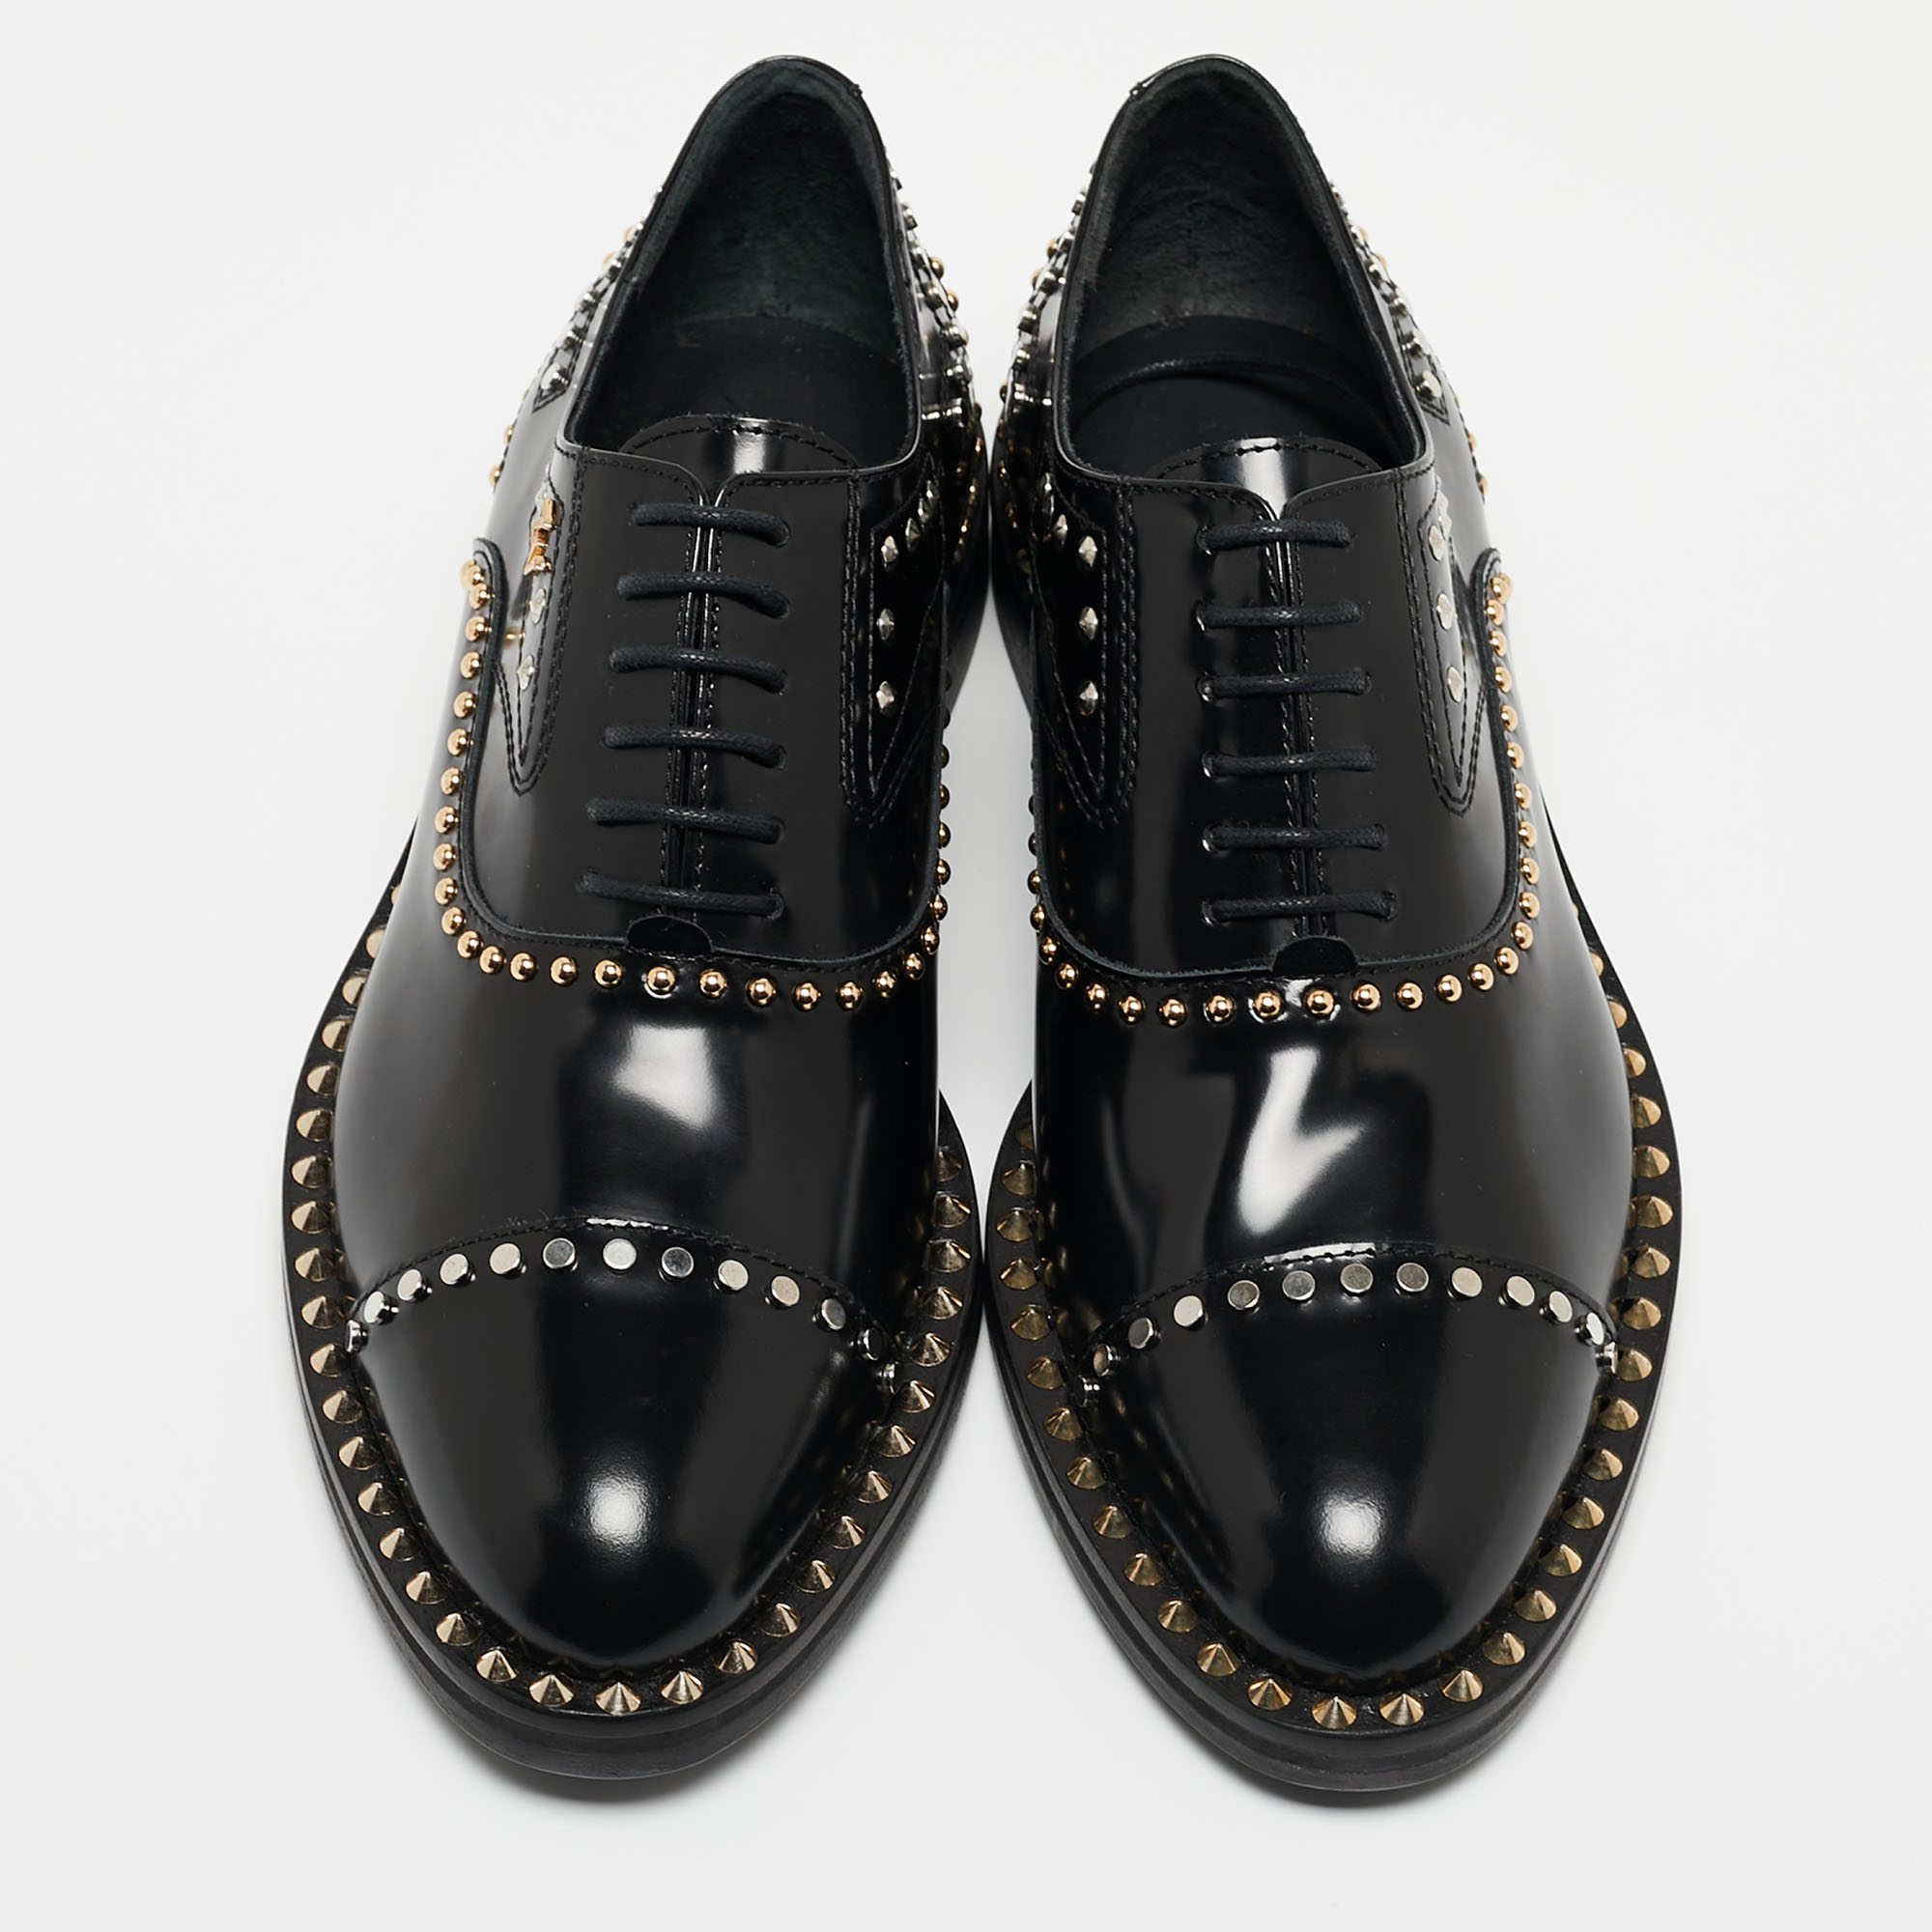 Zadig & Voltaire Black Leather Studded Youth Clous Oxfords Size 37